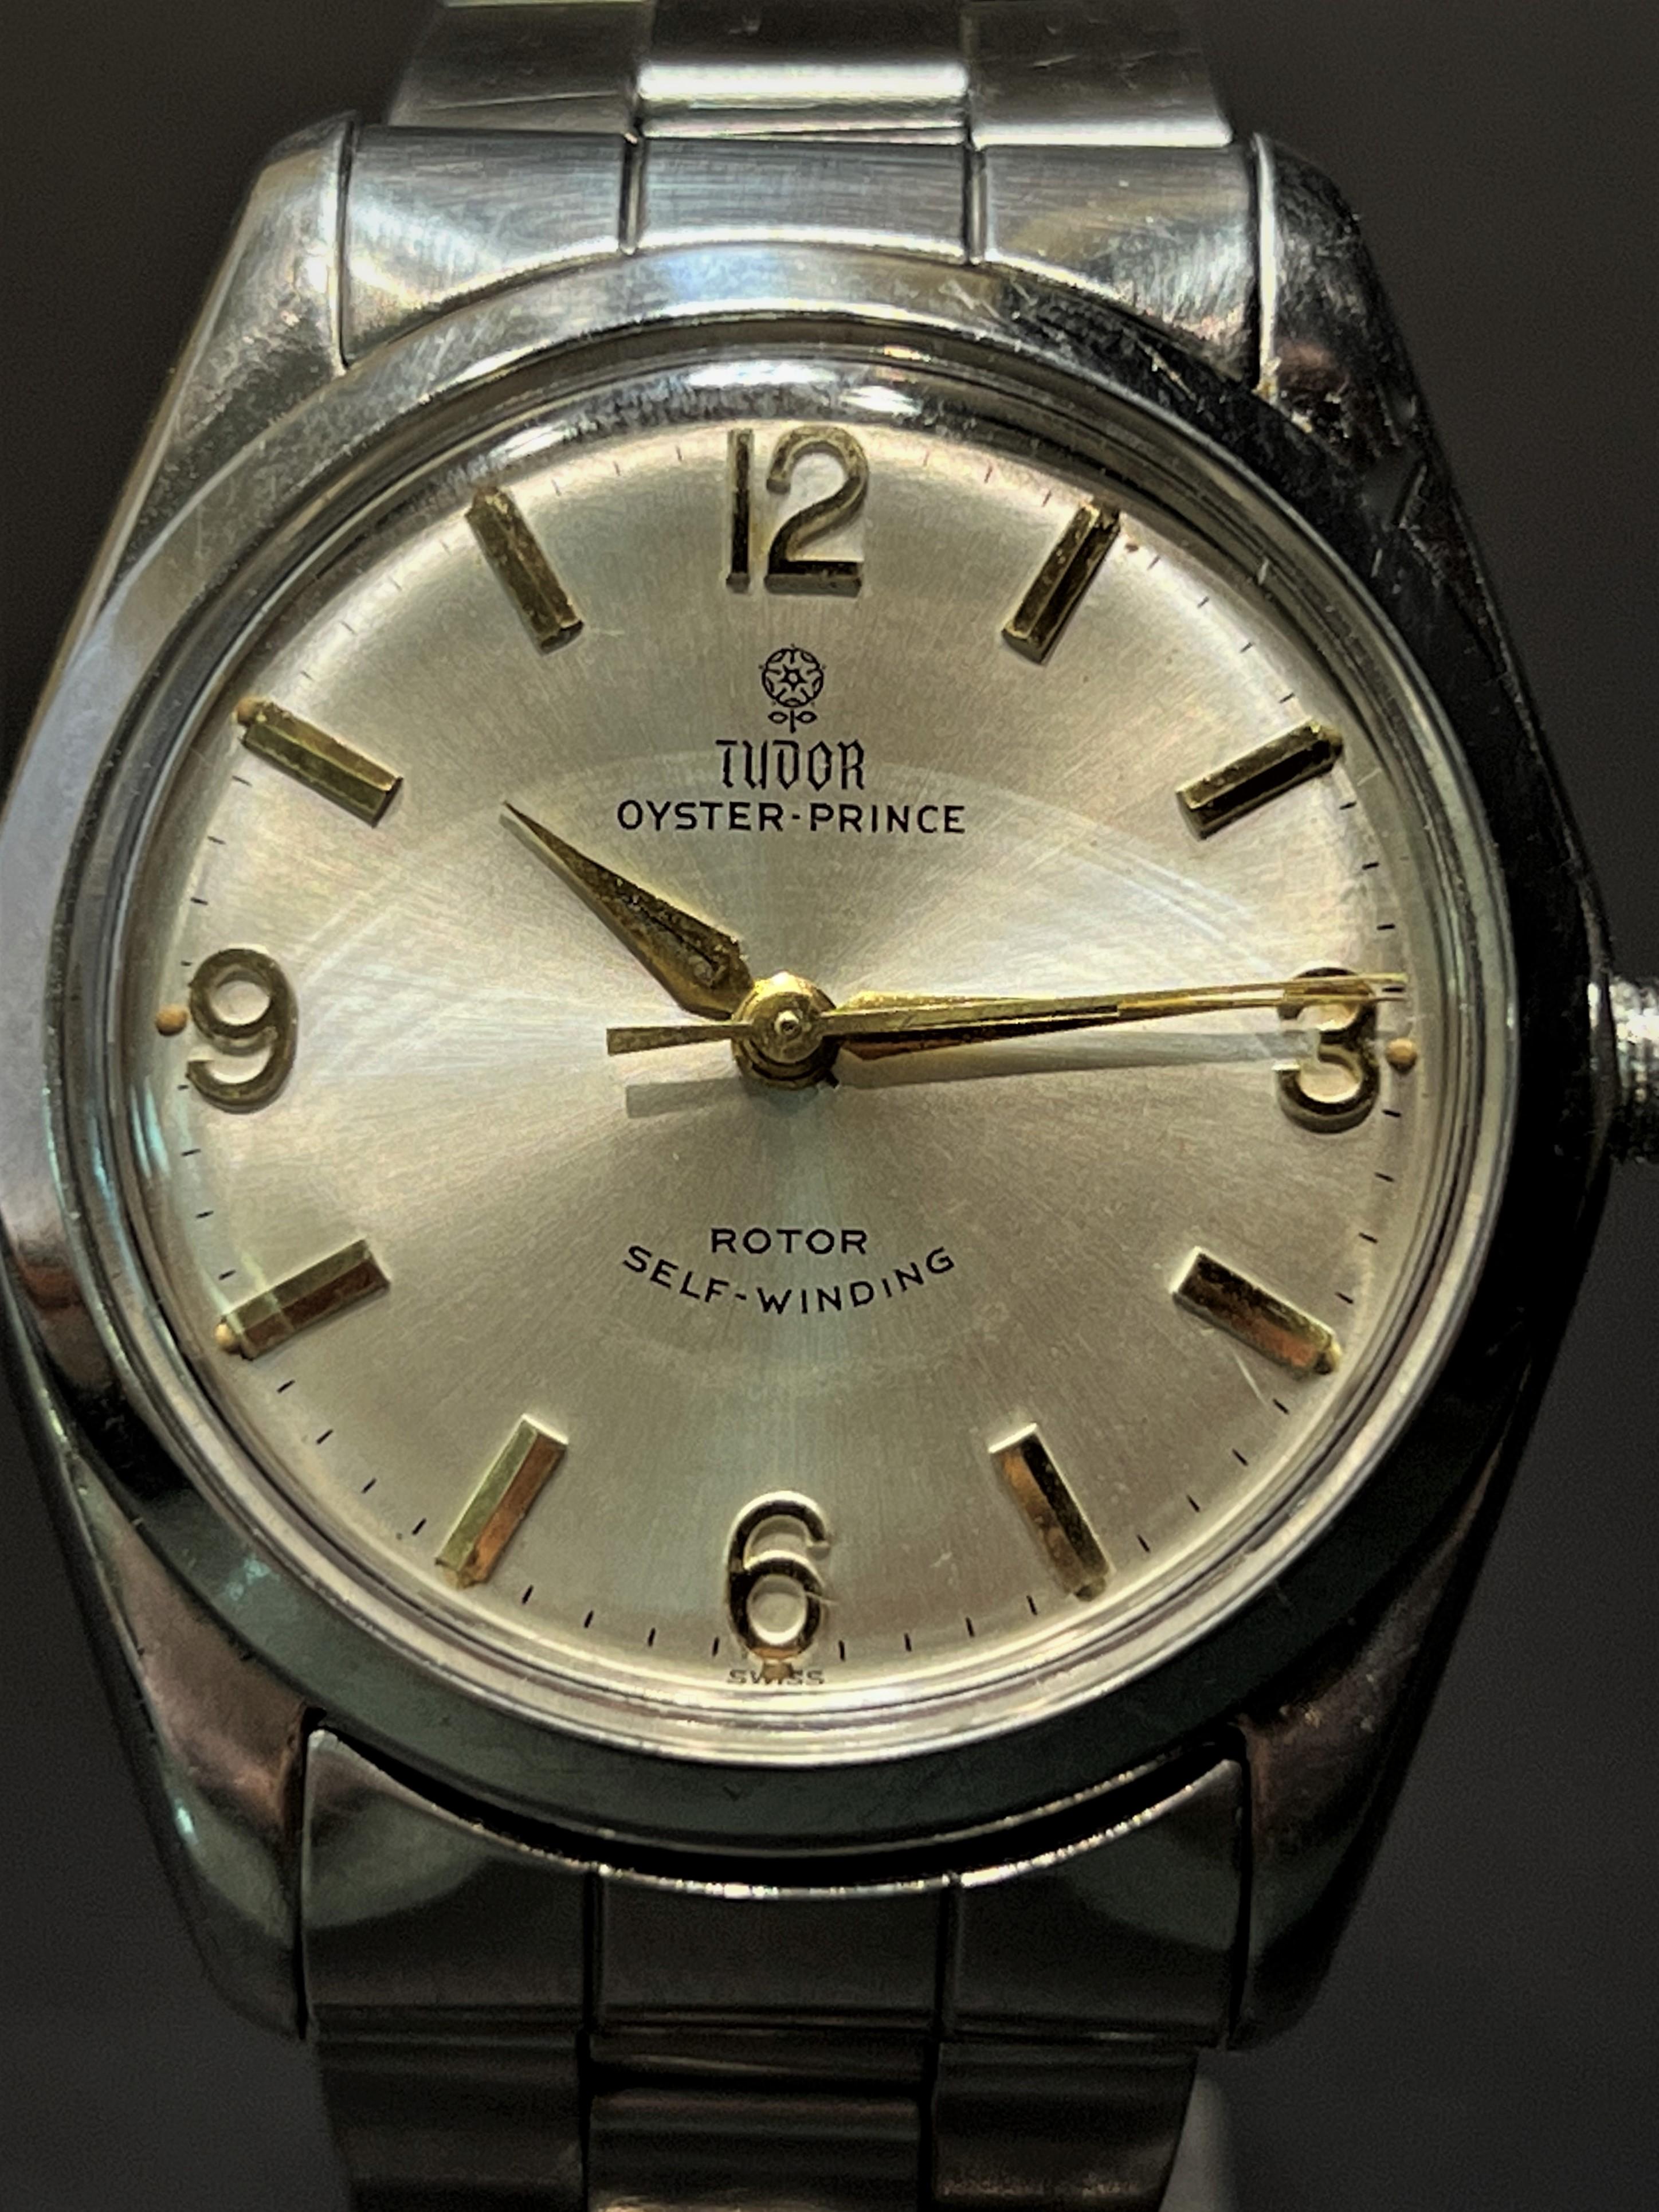 A guaranteed authentic vintage men’s Rolex Tudor Oyster-prince wristwatch. Serial number under band is 58XXXXX indicating the manufacture date of 1968. With its original Rolex period band. Crown will not screw down.

Size: The watch circumference is